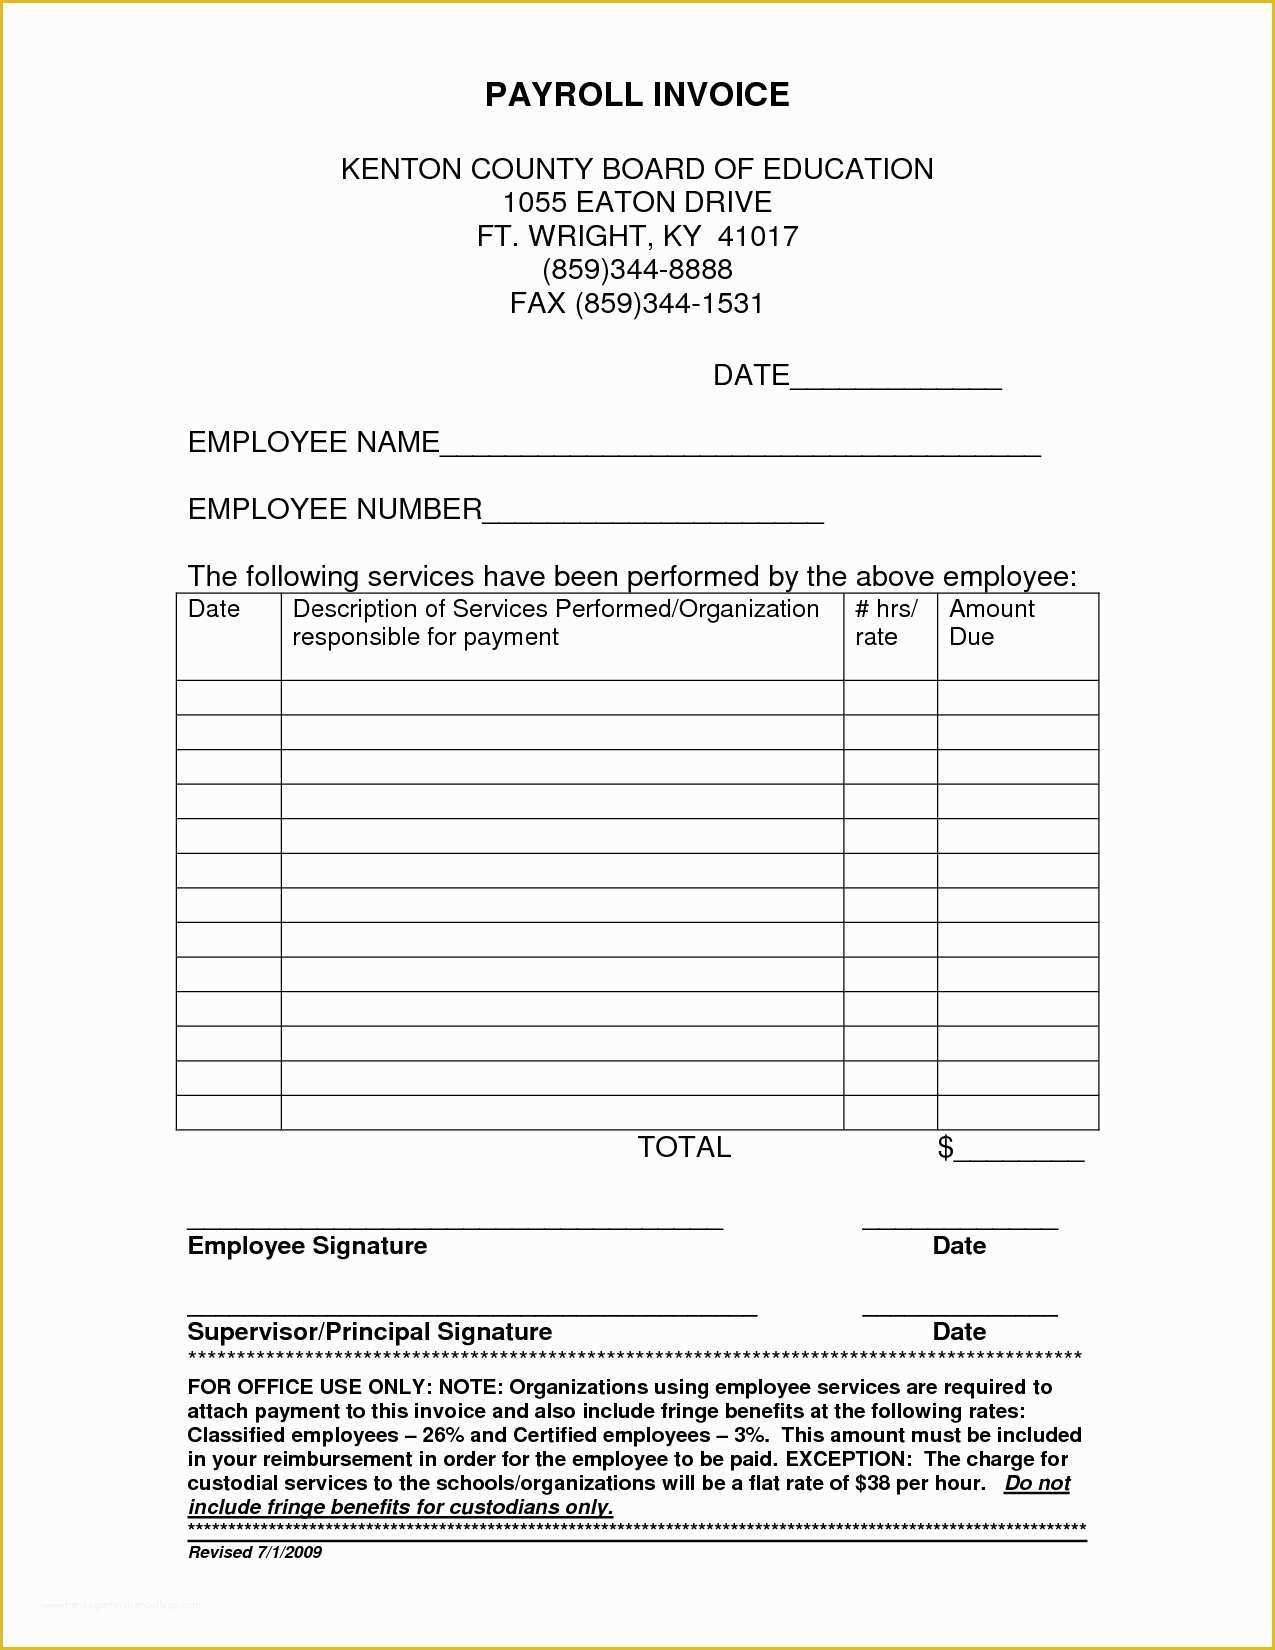 Free Payroll Invoice Template Of Payroll Invoice Template Invoice Template Ideas